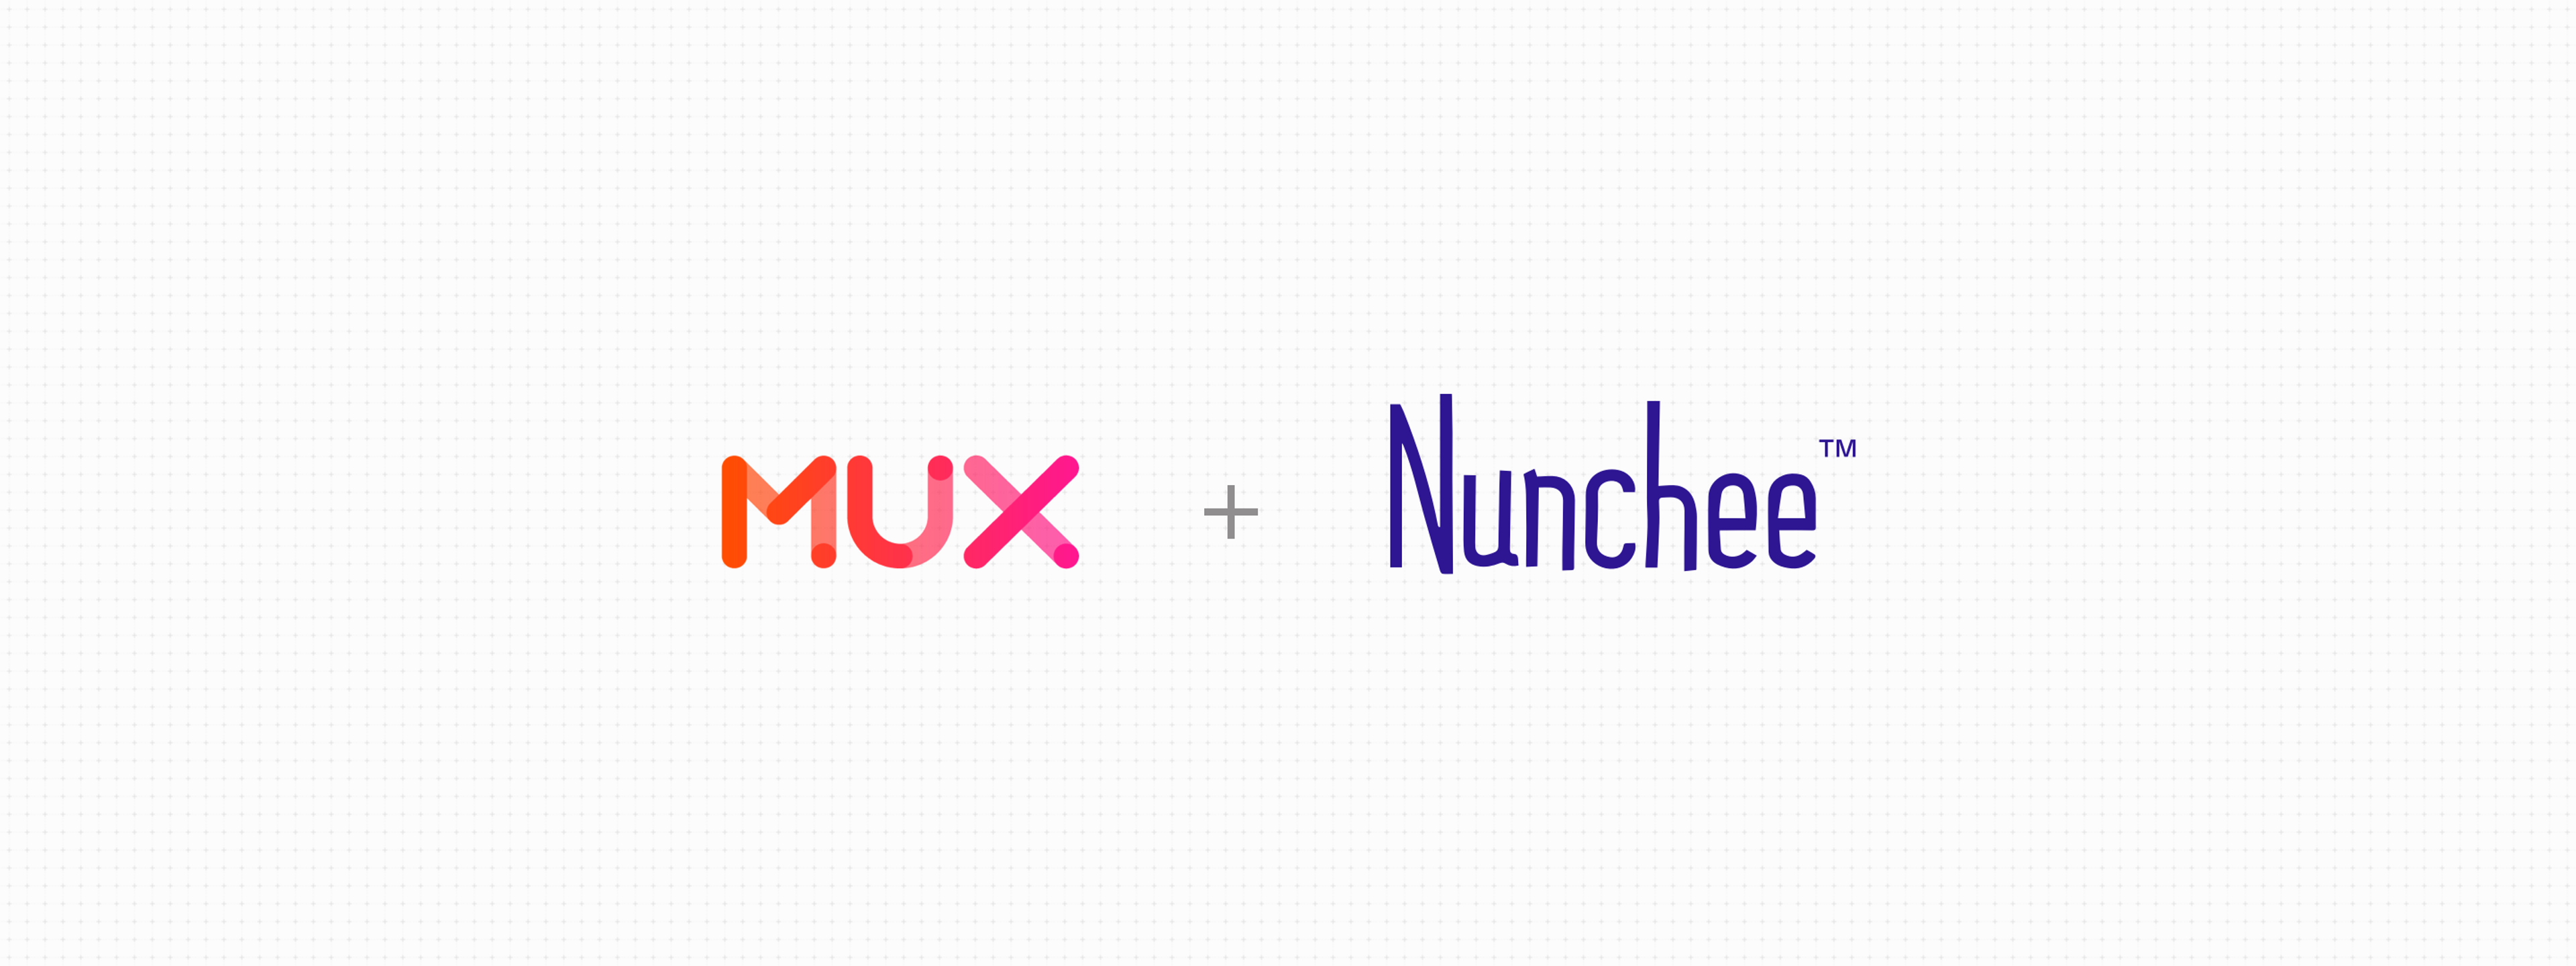 Announcing the Nunchee + Mux integration